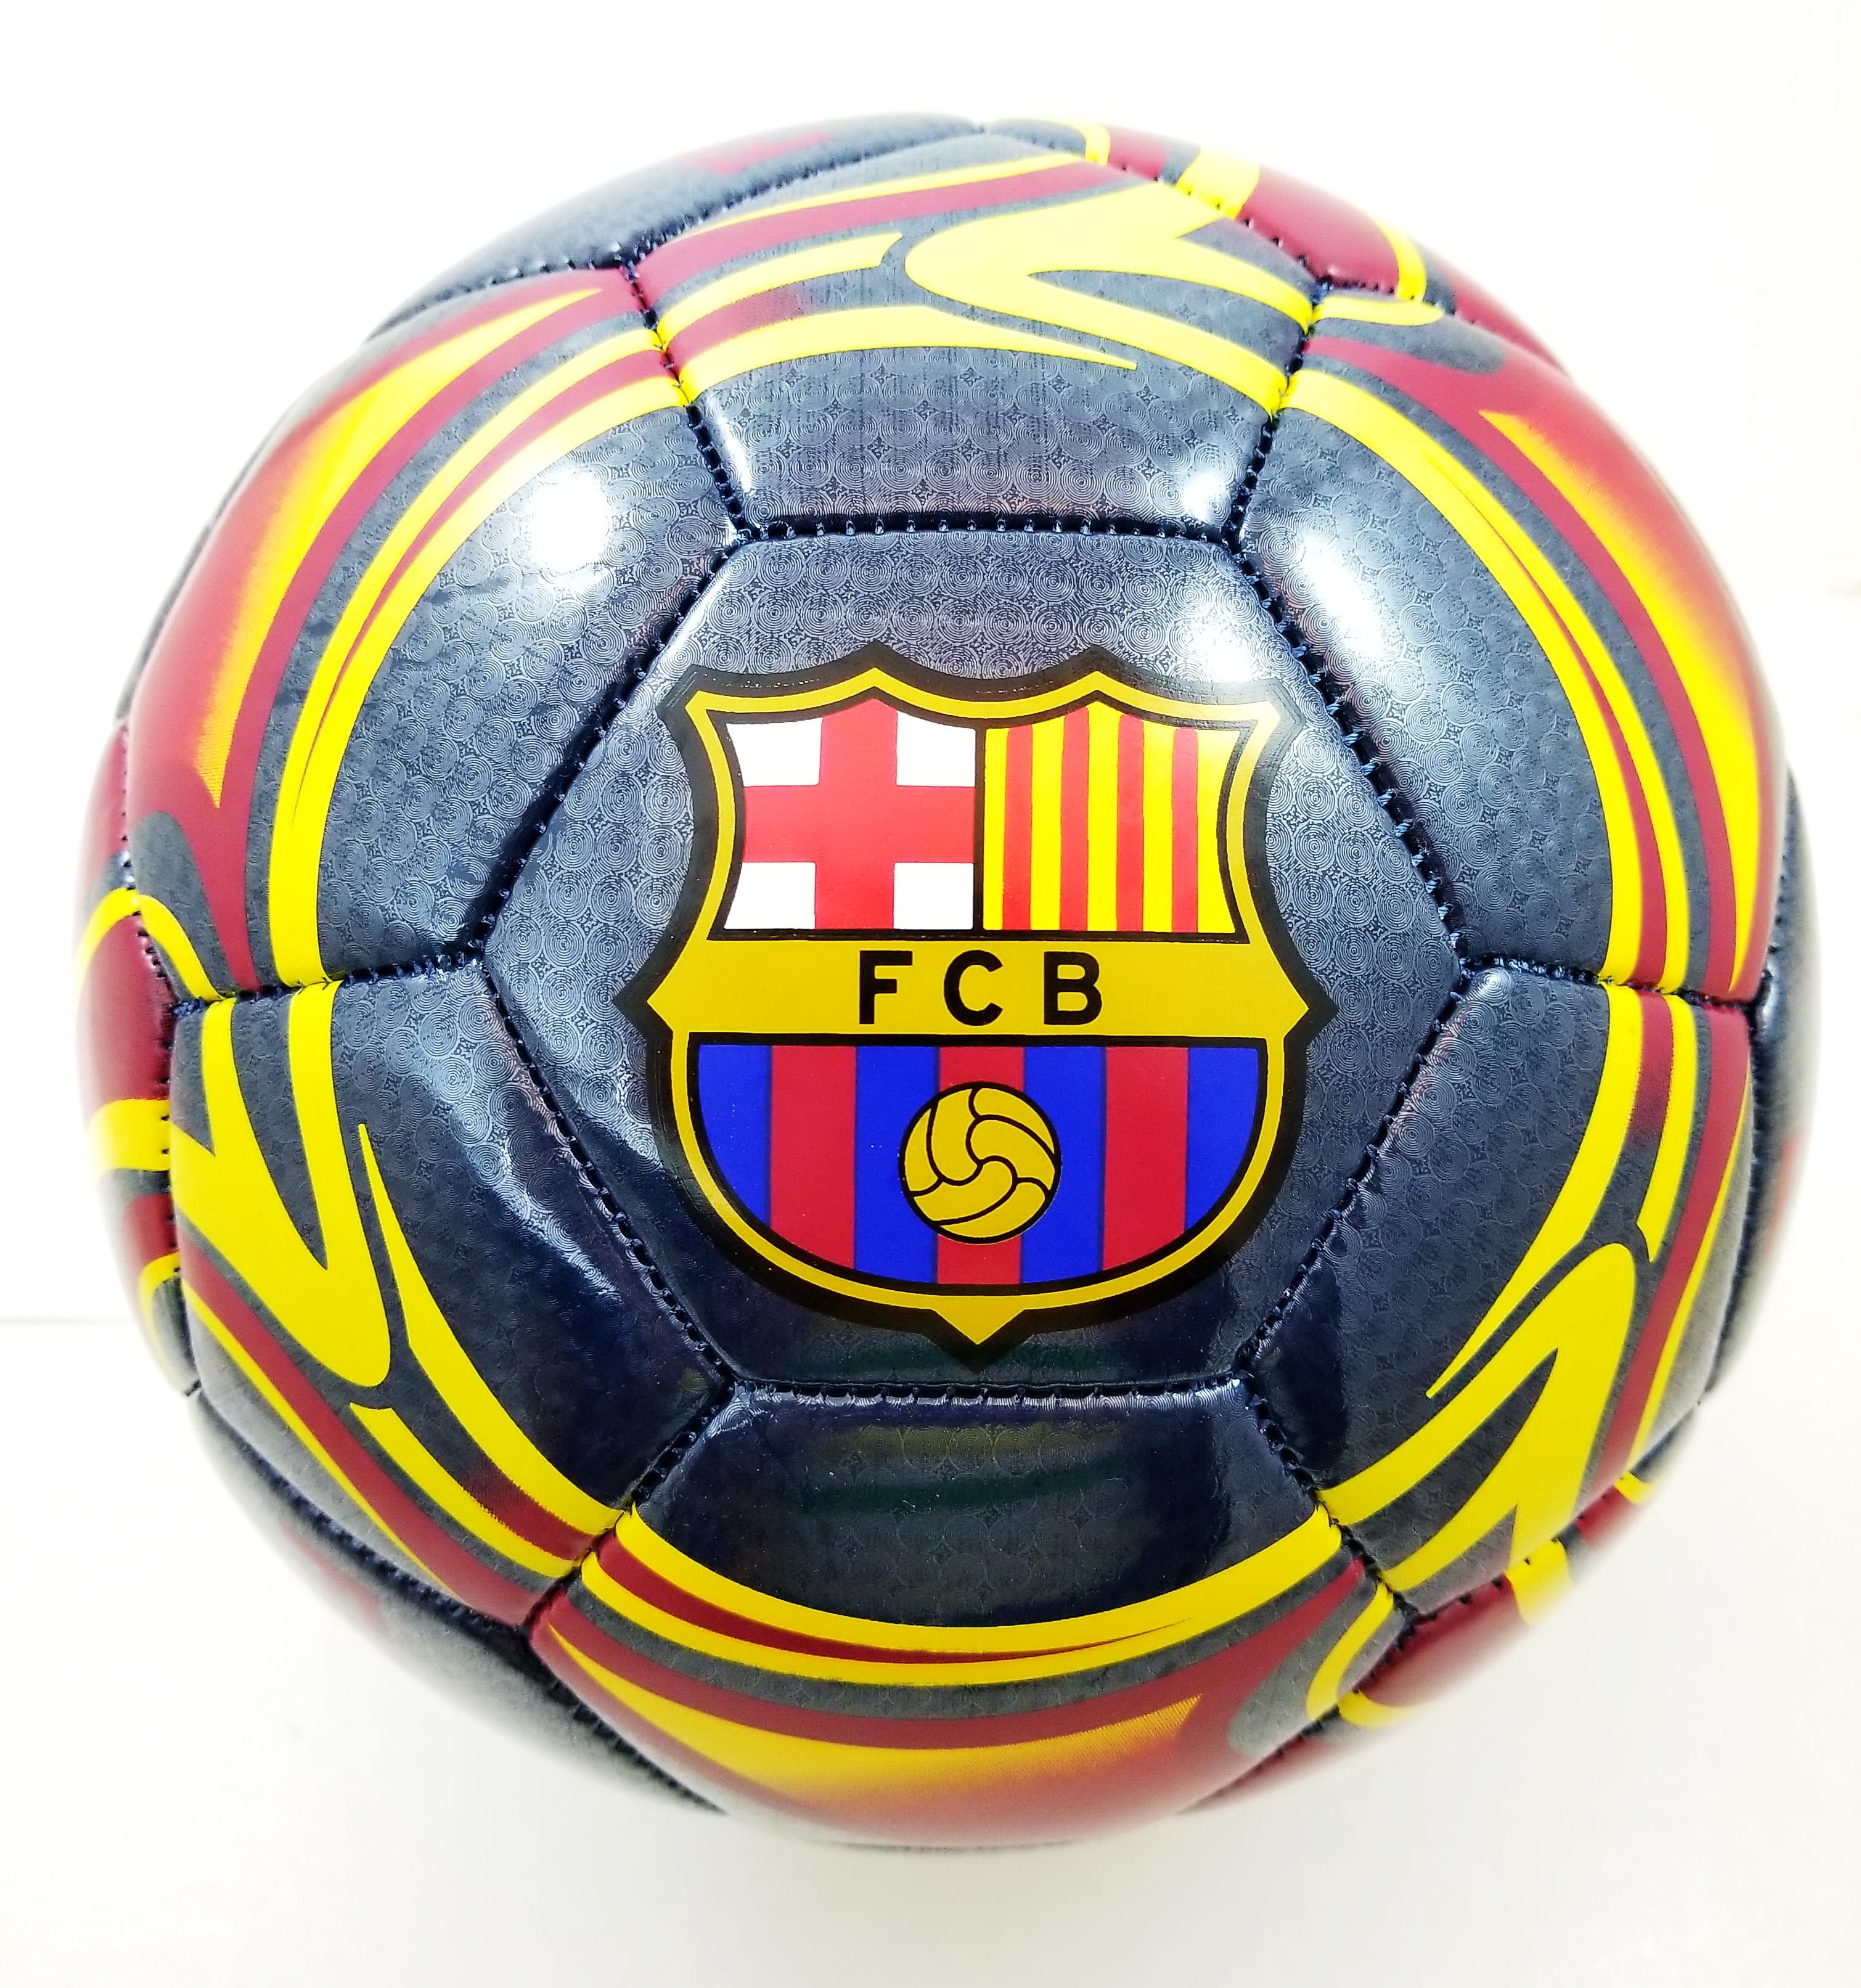 RED FCB Futbol FC BARCELONA Soccer Ball Size 5 Authentic Official Toy